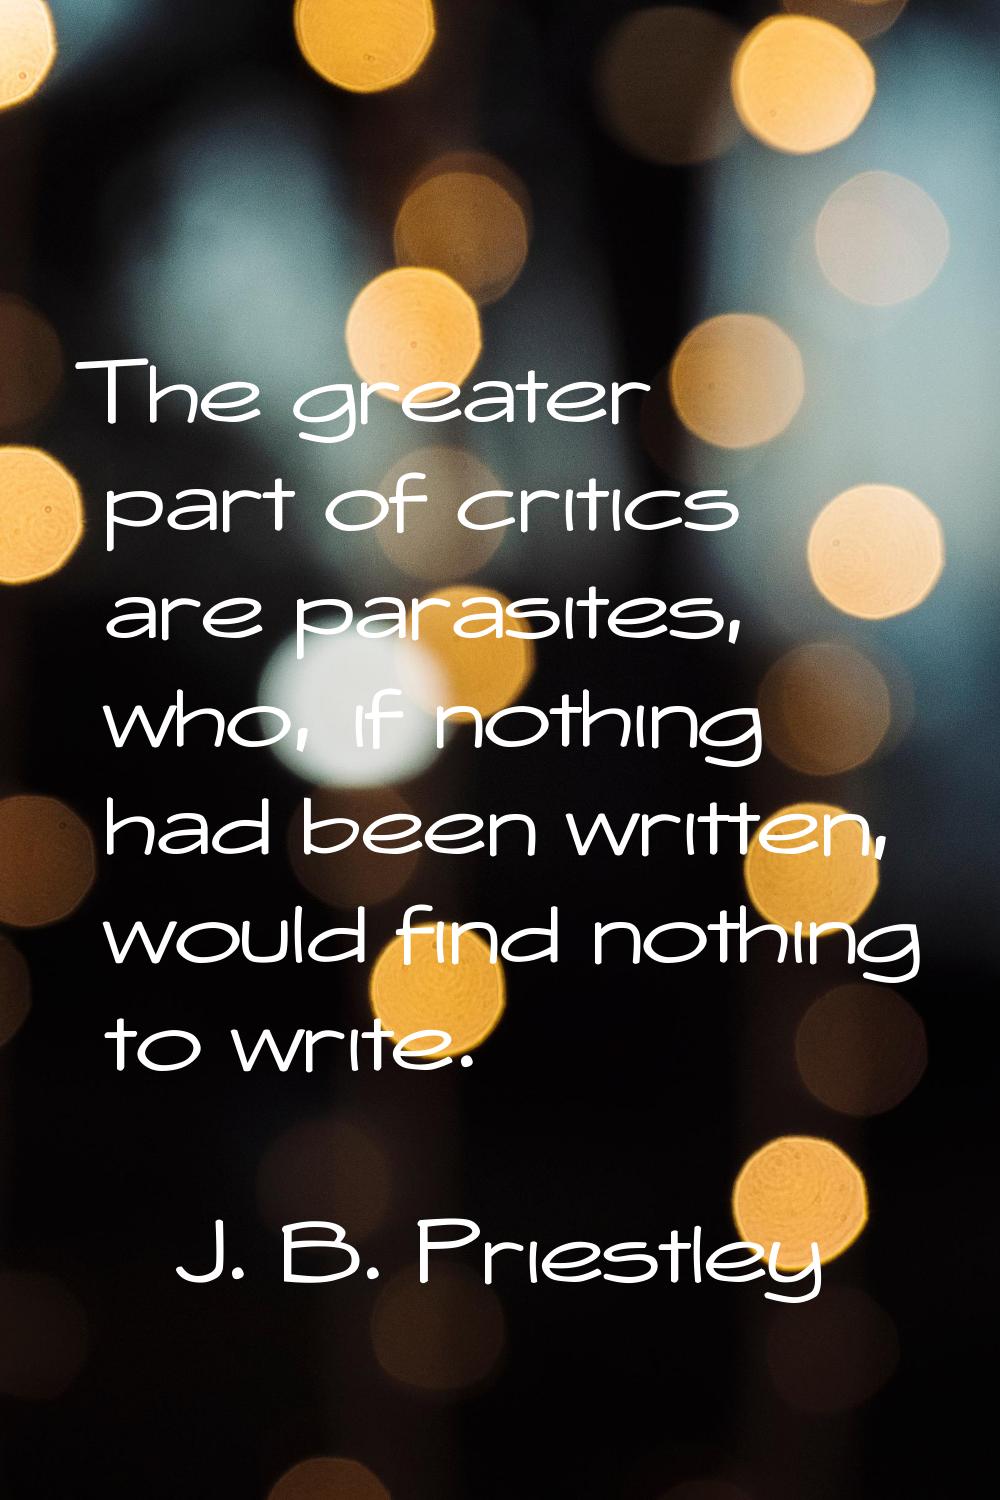 The greater part of critics are parasites, who, if nothing had been written, would find nothing to 